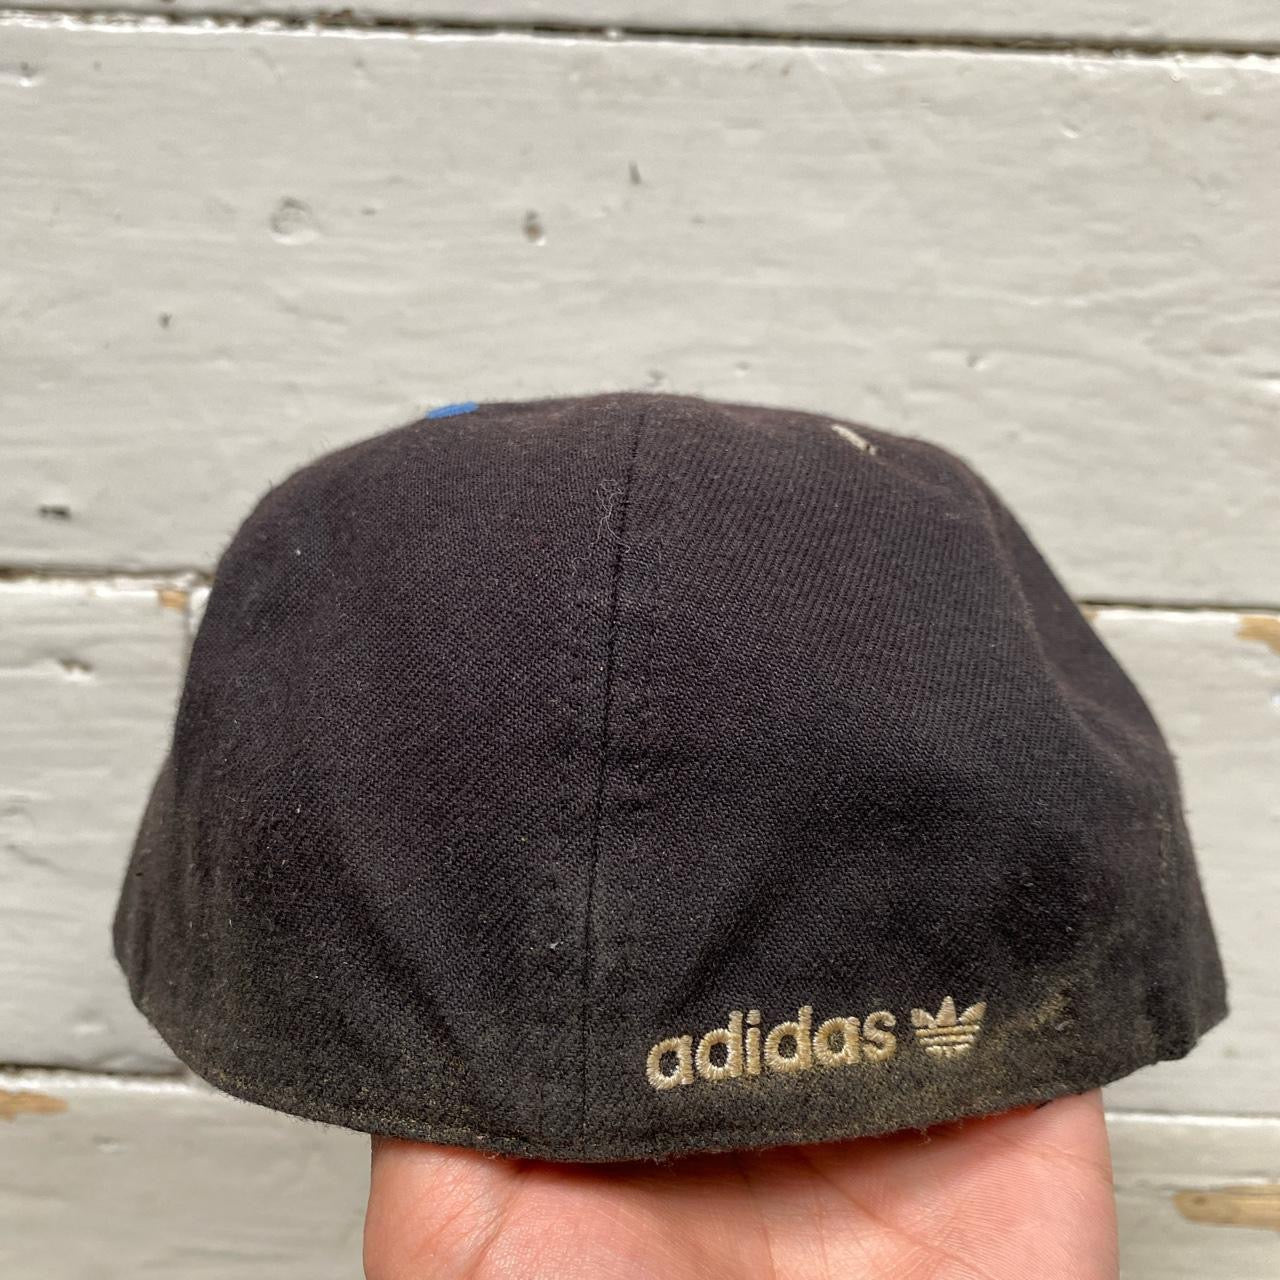 Adidas Adicolor Vintage Fitted Cap (Large)